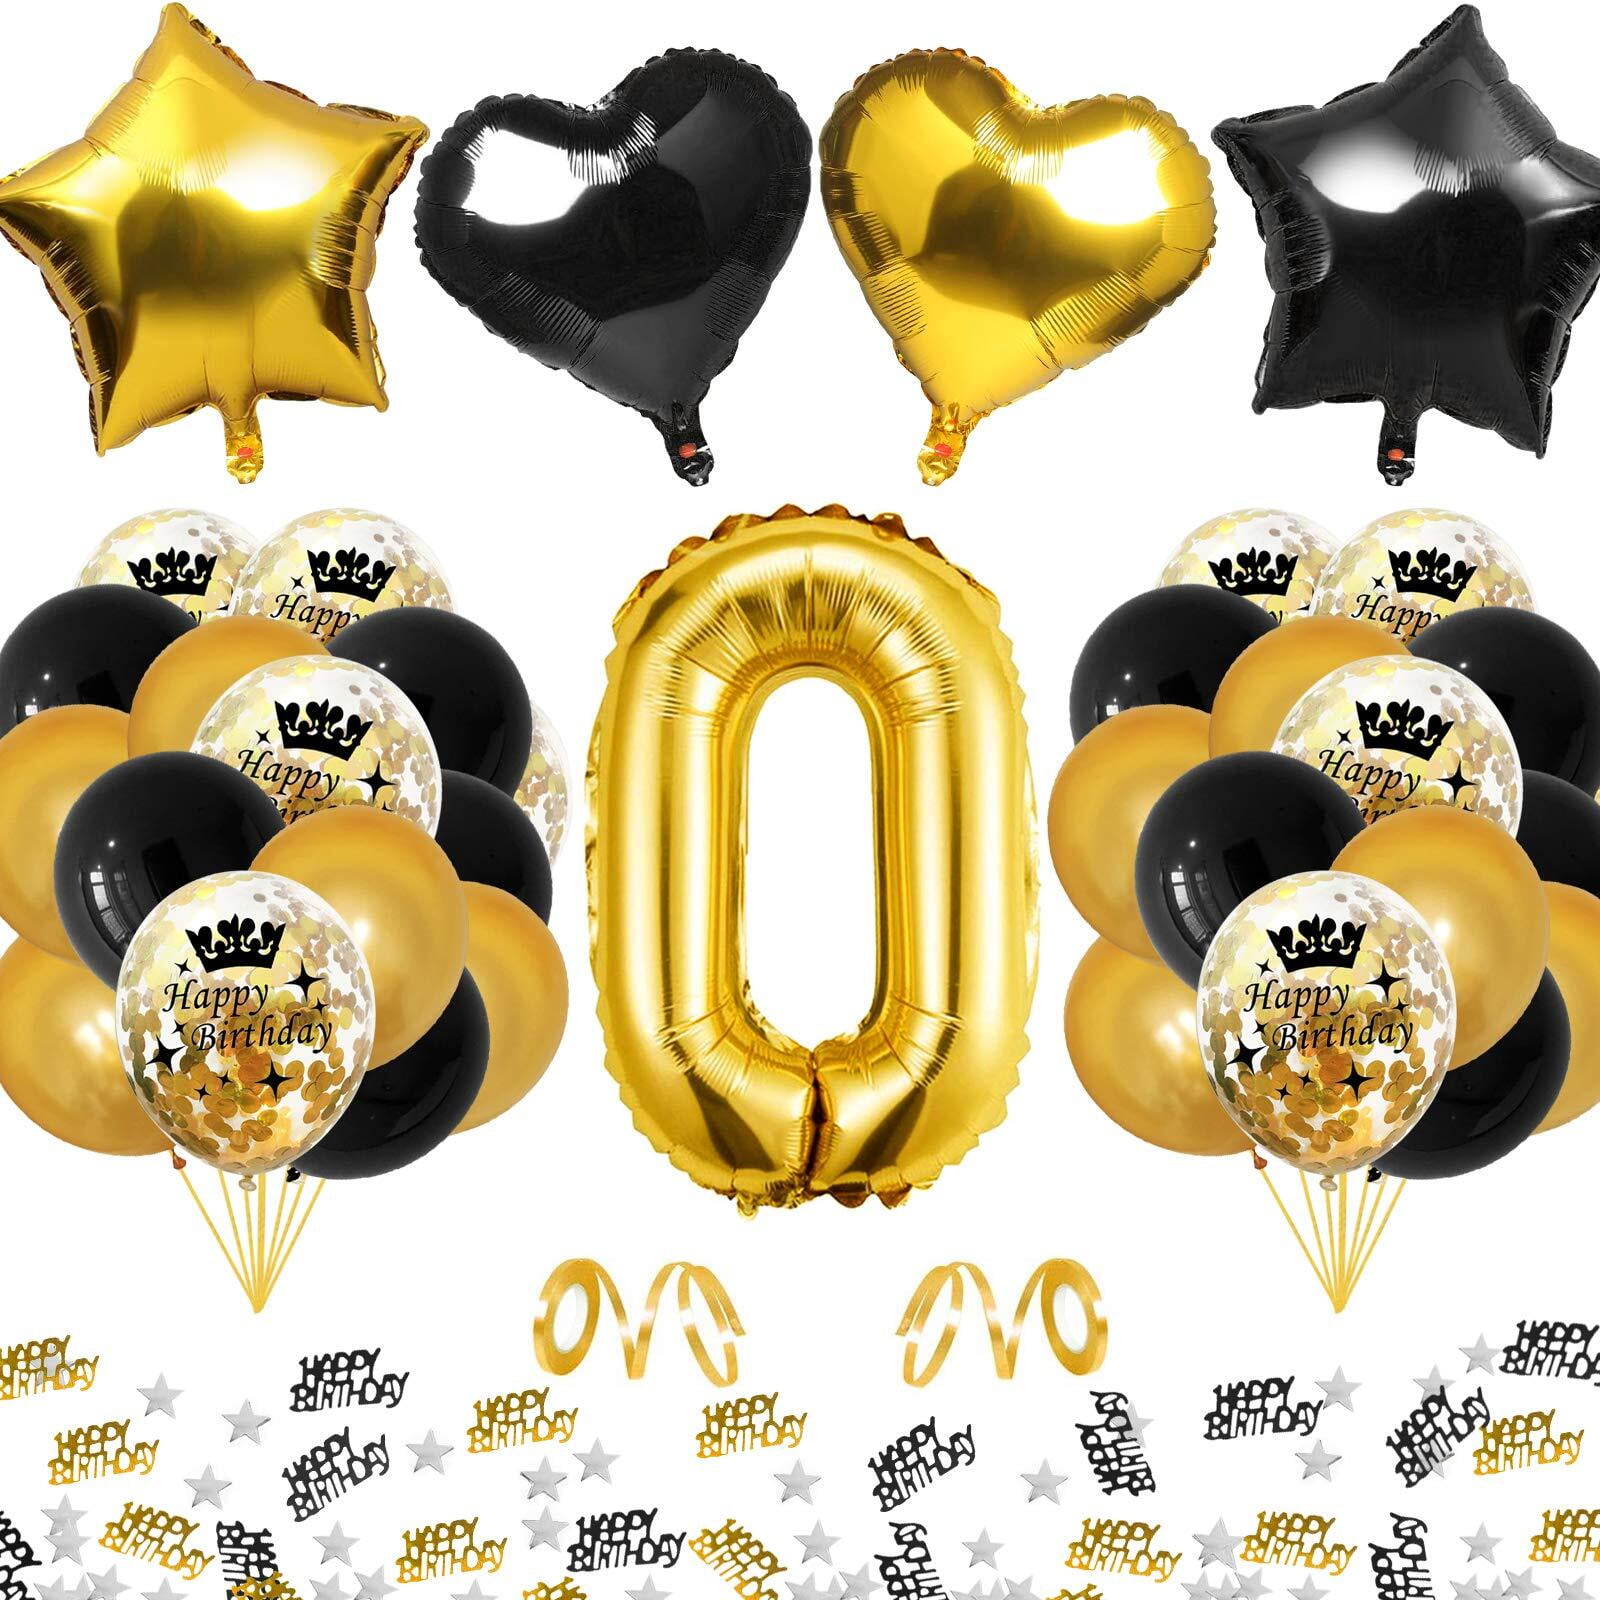 Black Gold Silver Theme Birthday Balloons 40inch Black Numbers Adults Boy  Birthday Party Decorations Baby Shower Supplies Globos